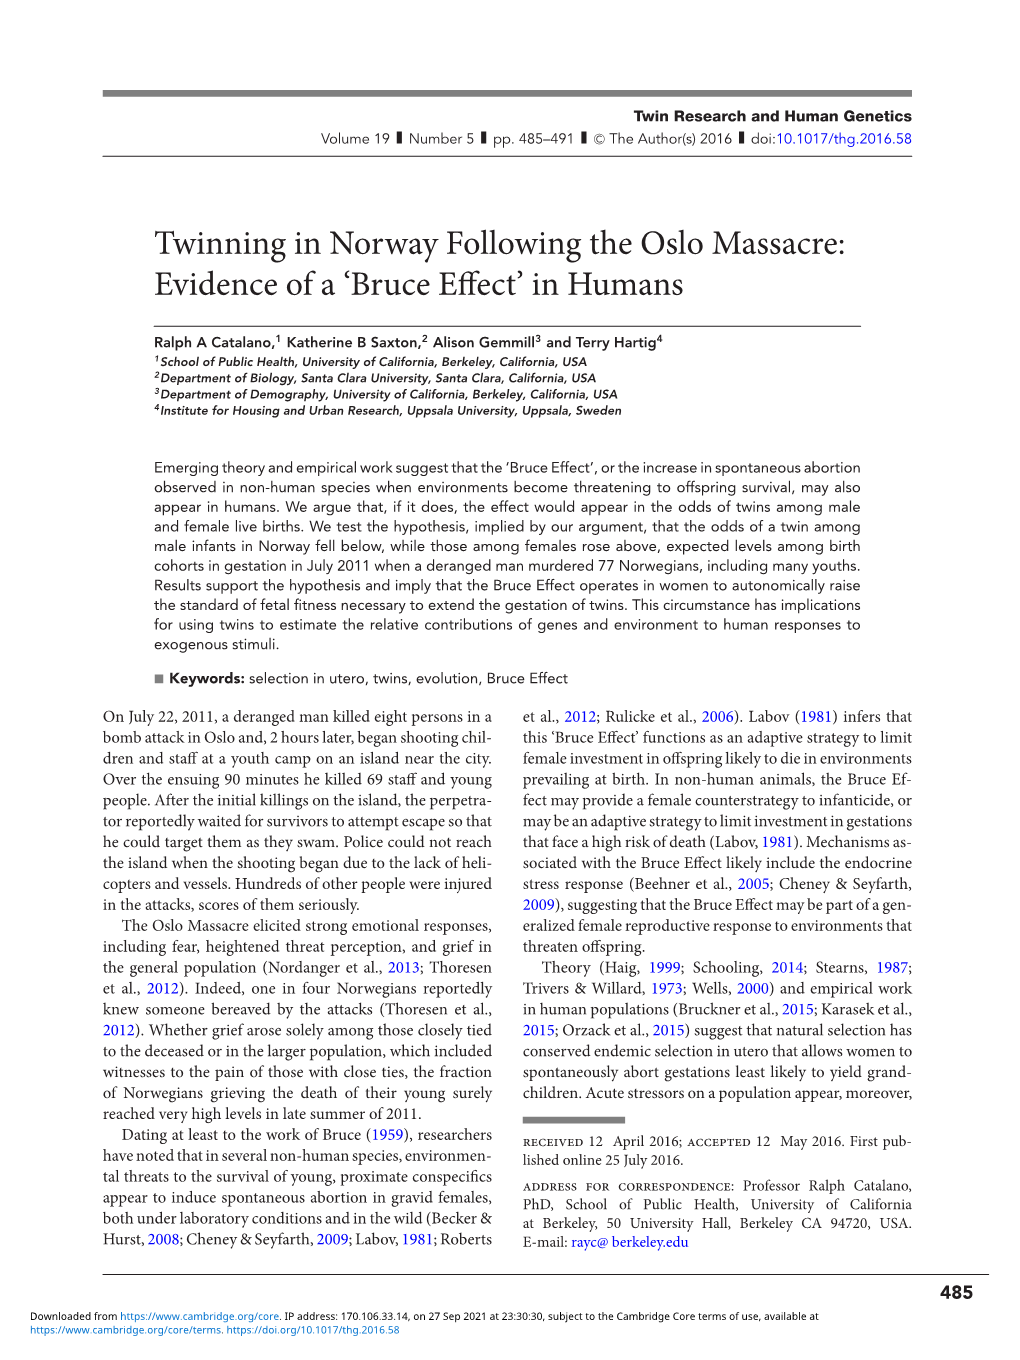 Twinning in Norway Following the Oslo Massacre: Evidence of a 'Bruce Effect' in Humans